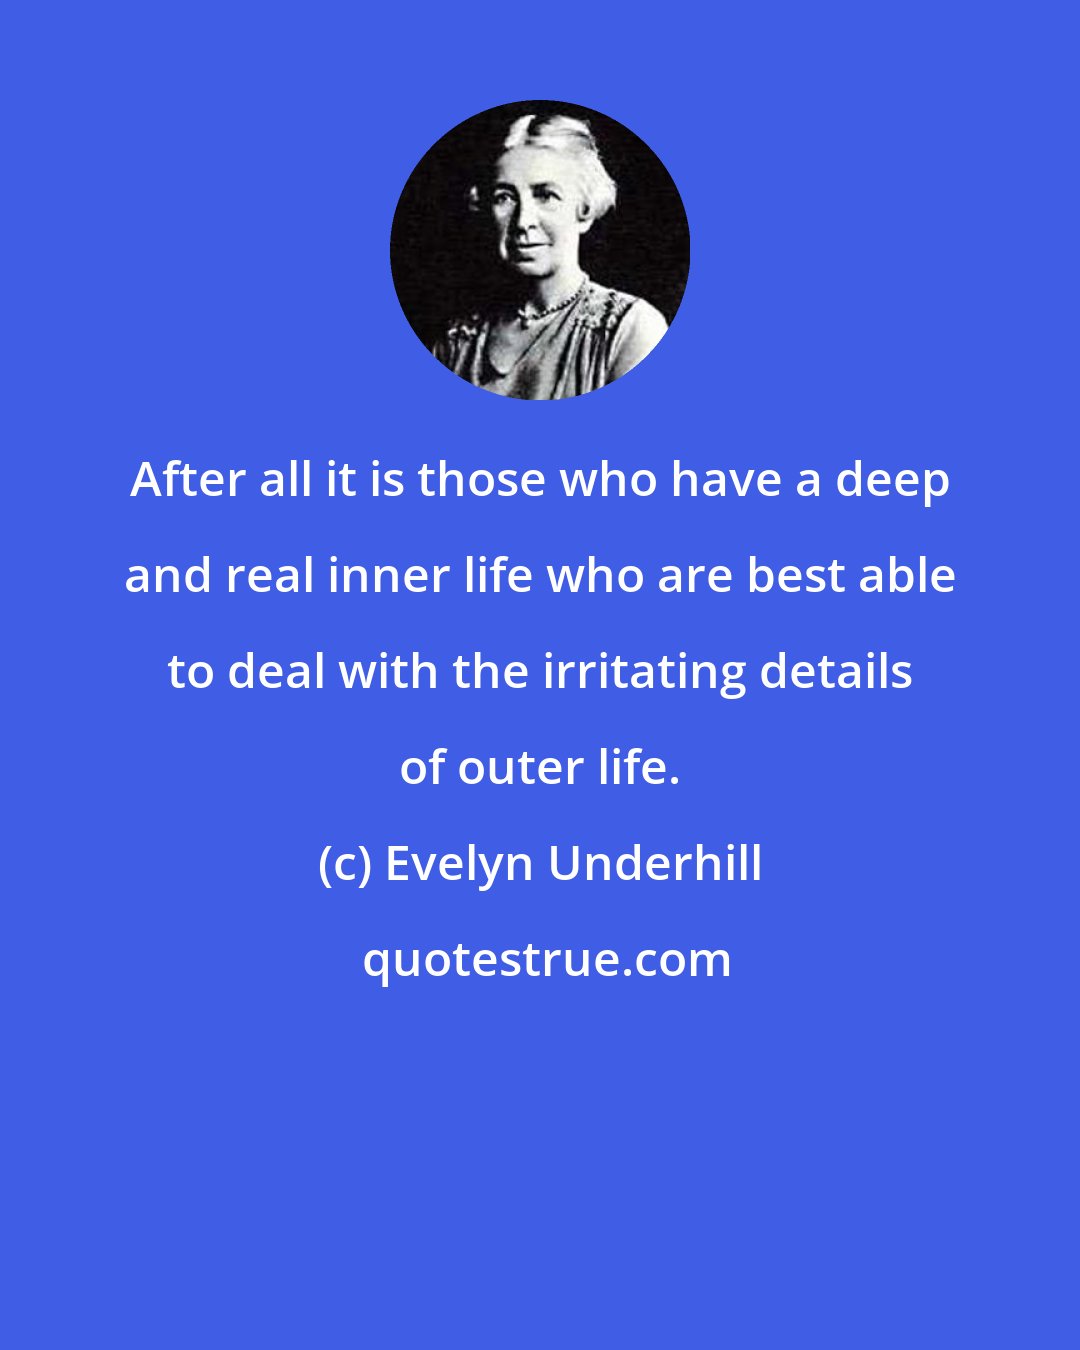 Evelyn Underhill: After all it is those who have a deep and real inner life who are best able to deal with the irritating details of outer life.